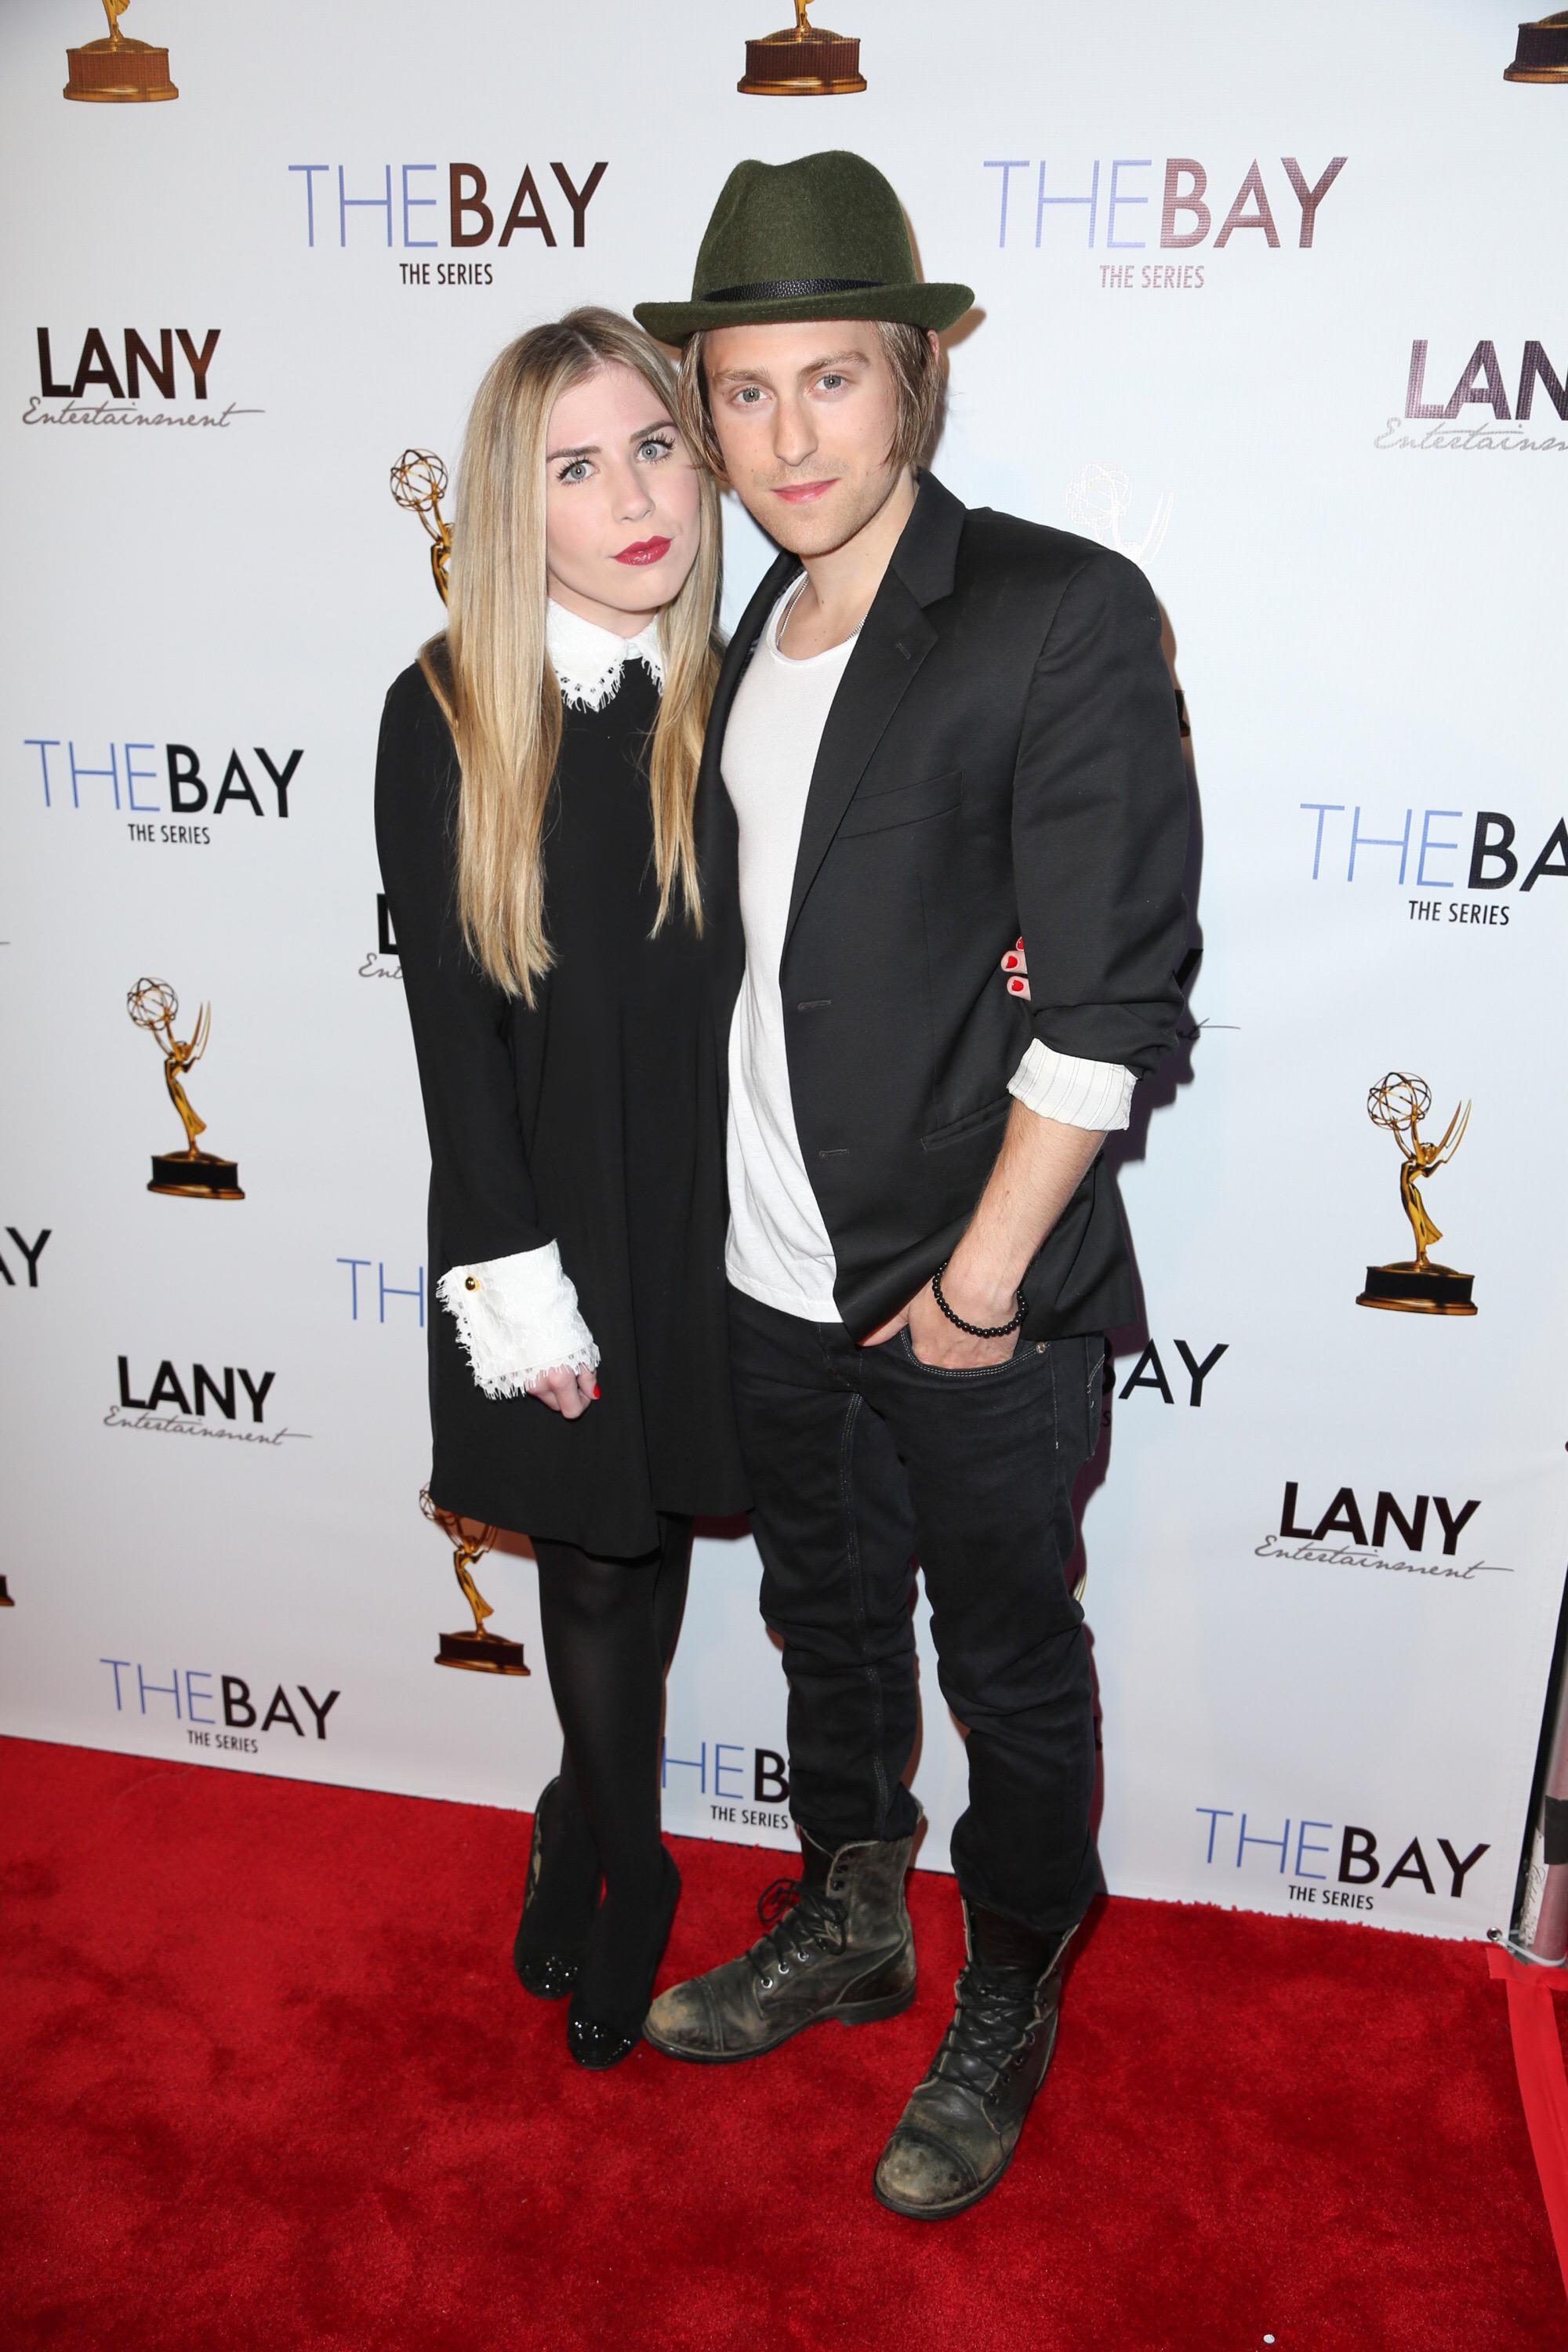 Eric Nelsen and Sainty Nelsen at an Emmy event honoring, The Bay the Series.